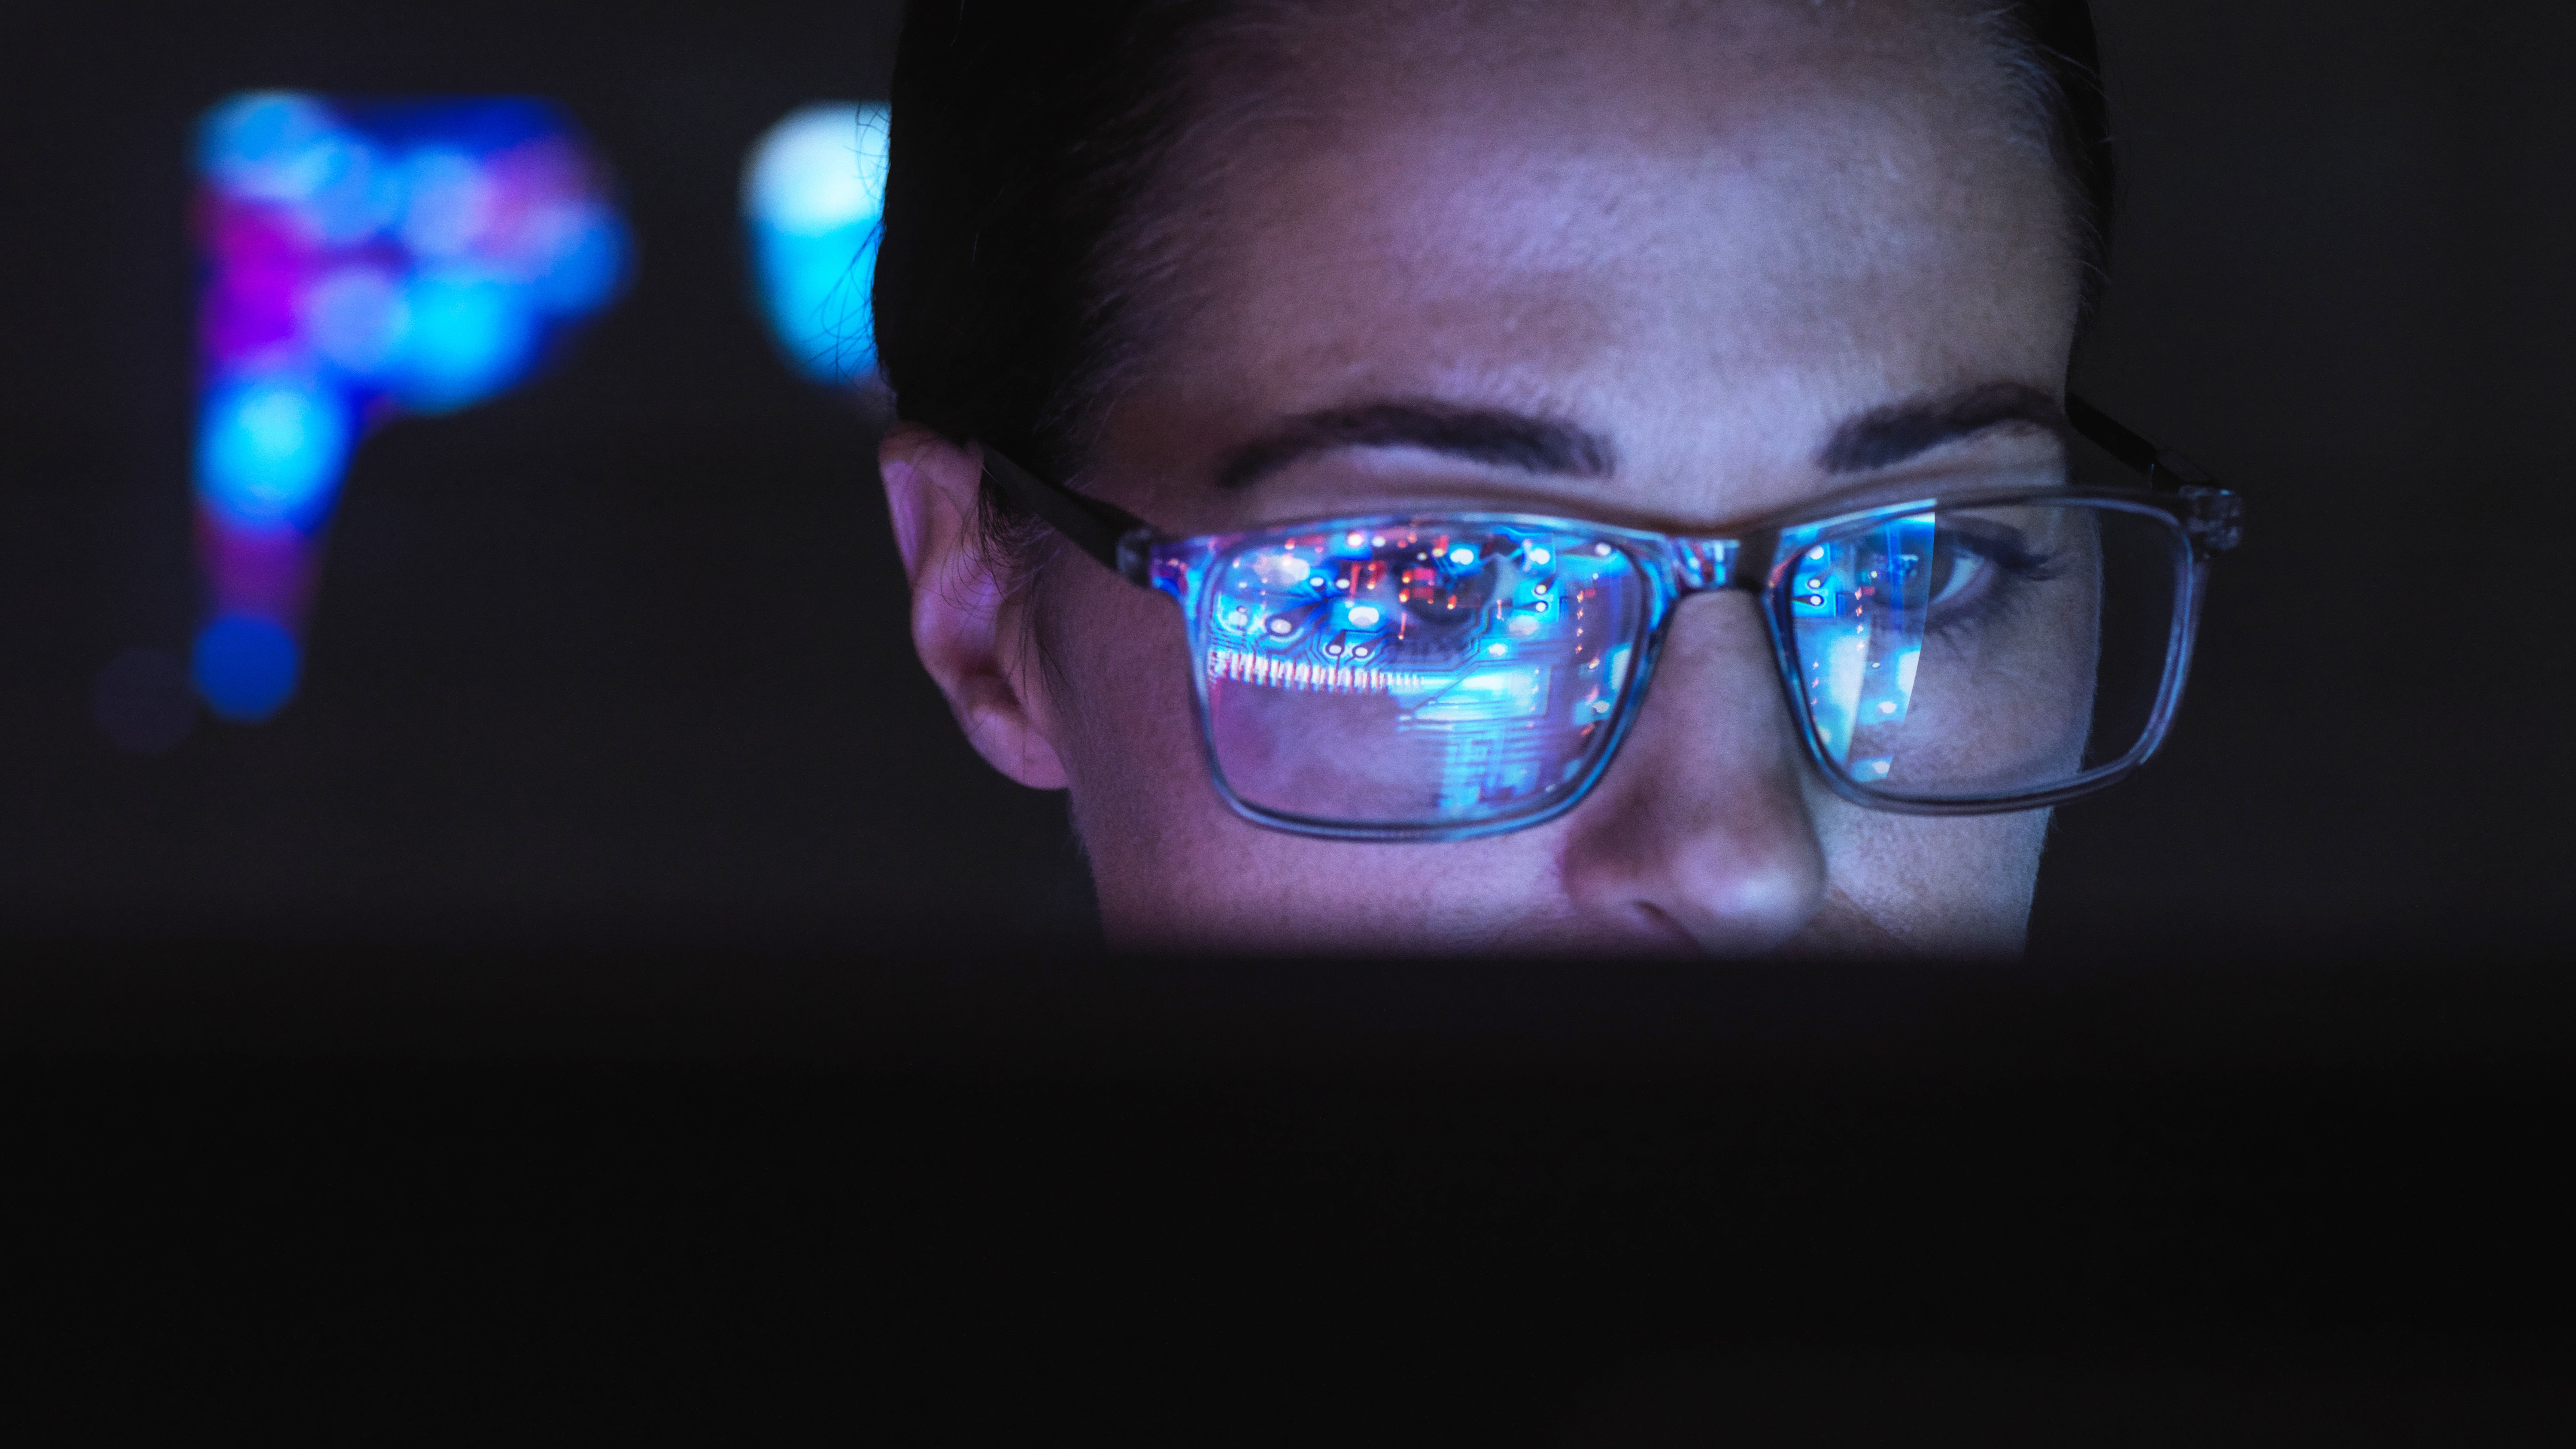 Software security concept image showing software engineer working at a computer with screen reflecting in spectacles.